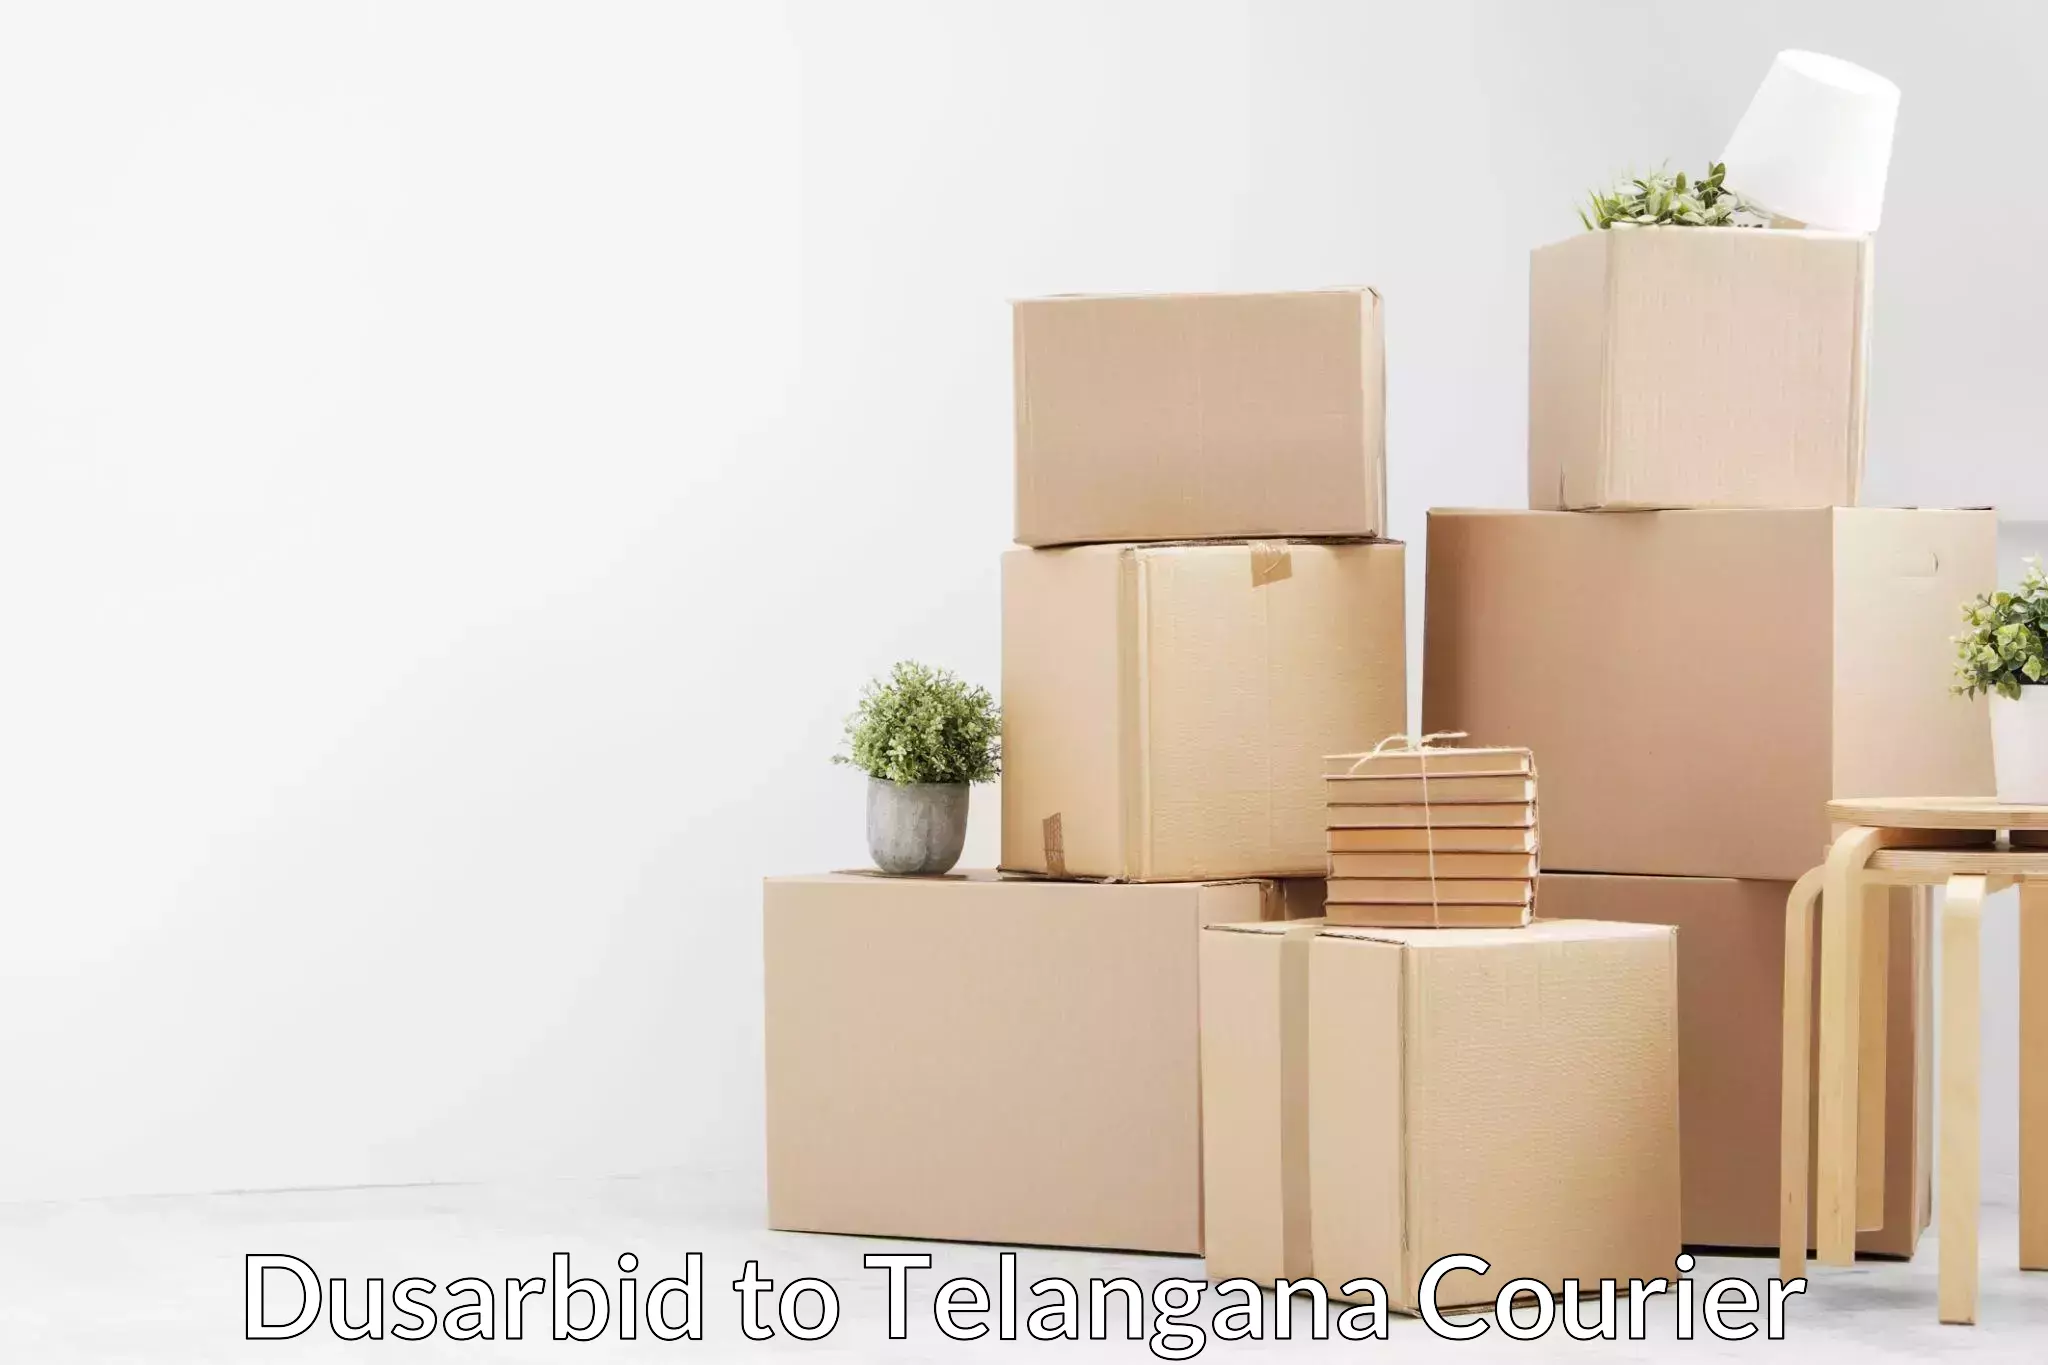 Reliable relocation services Dusarbid to Telangana